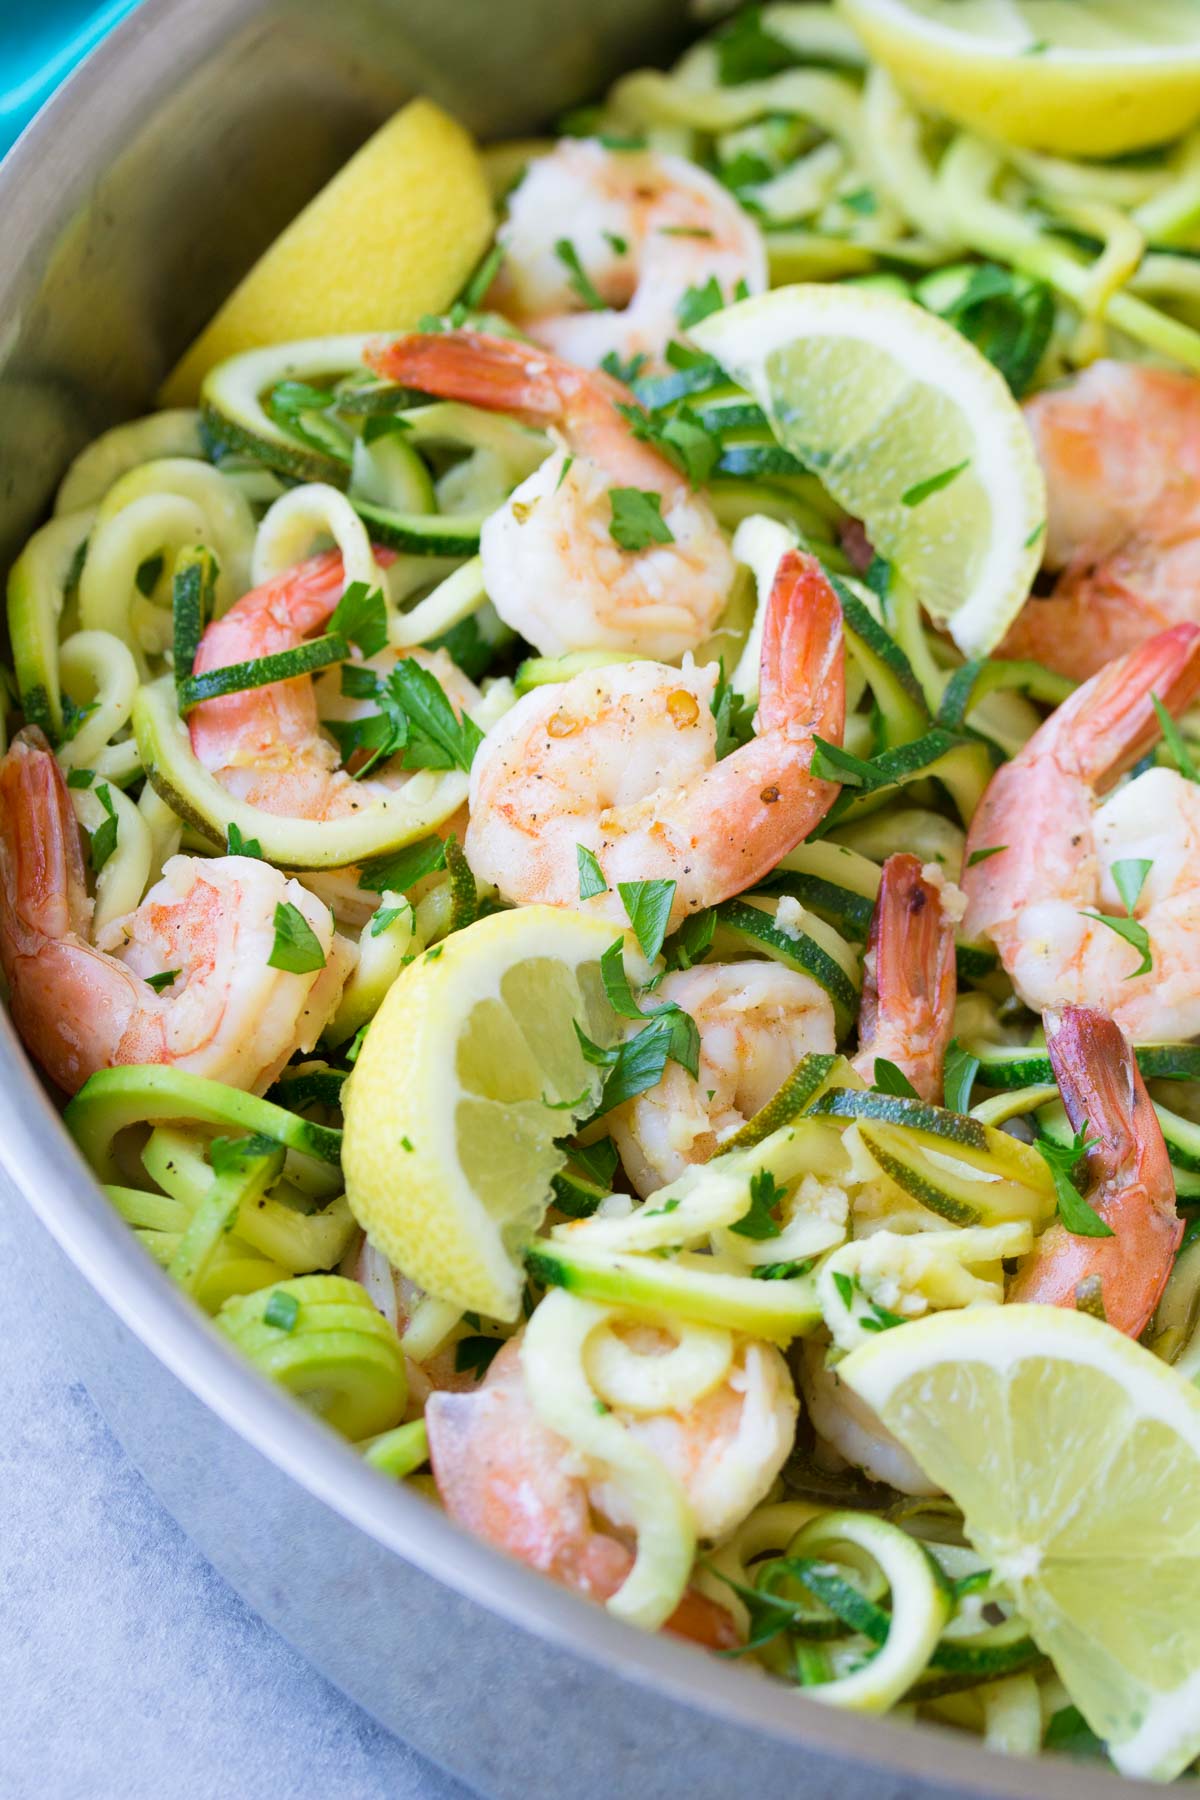 These Lemon Garlic Shrimp and Zucchini Noodles are a 20 minute meal that's gluten free and full of fresh flavors. This healthy dinner is made in one pot!